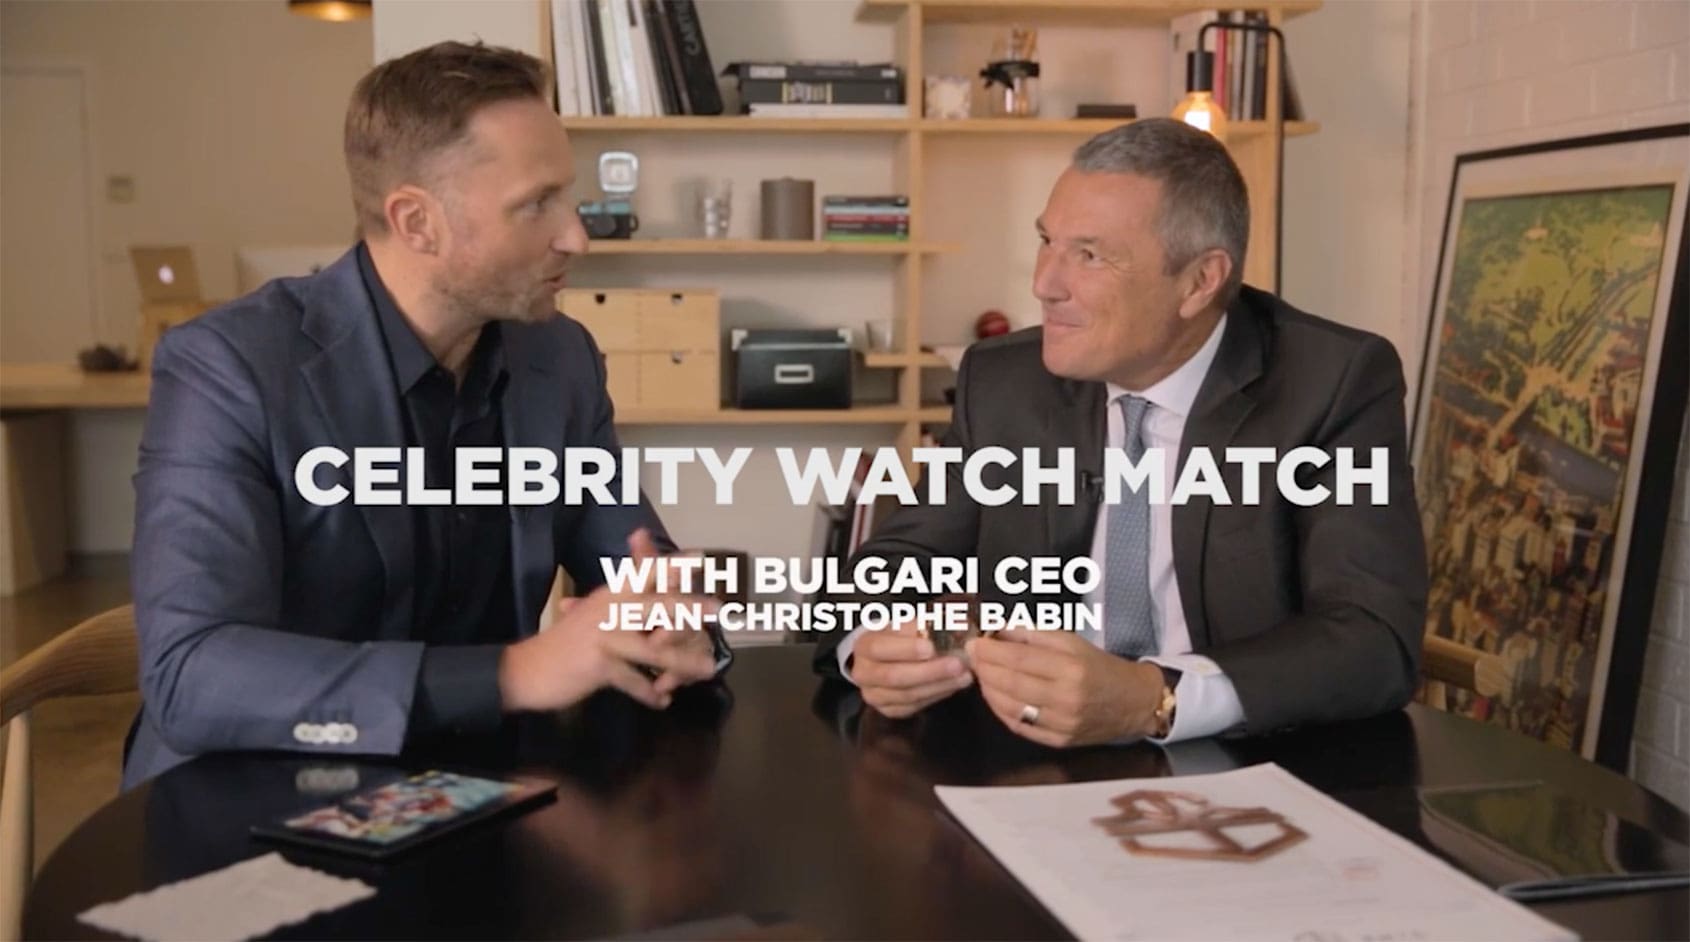 VIDEO: Bulgari CEO chooses watches for our PM, Rebel Wilson, Joel Edgerton in an unmissable Celebrity Watch Match